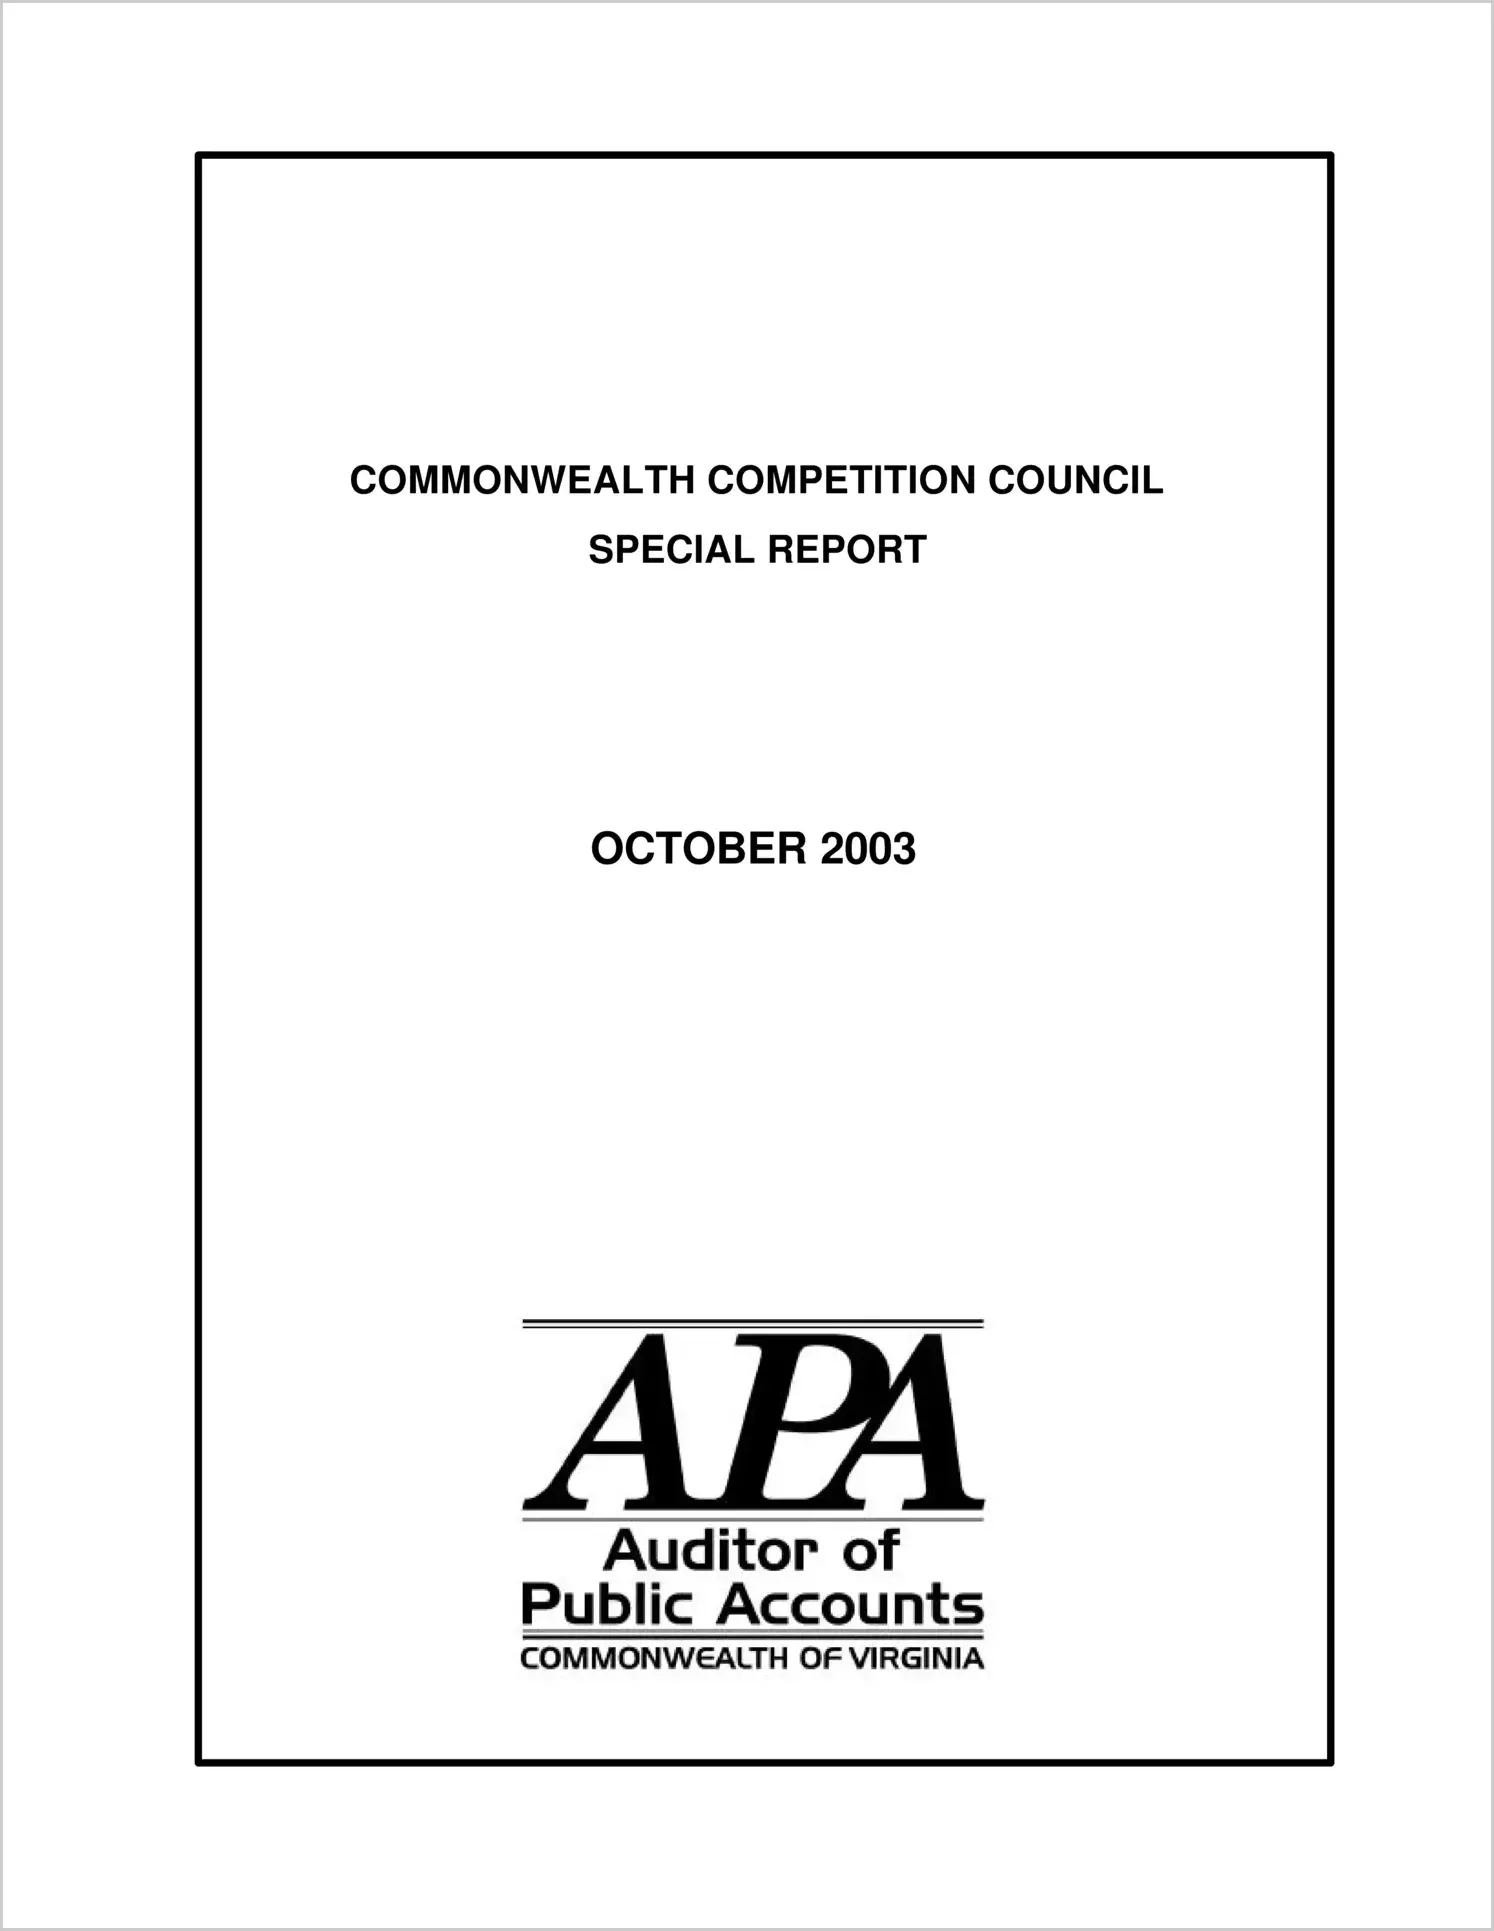 Special ReportCommonwealth Competition Council(Report Date: October 2003)